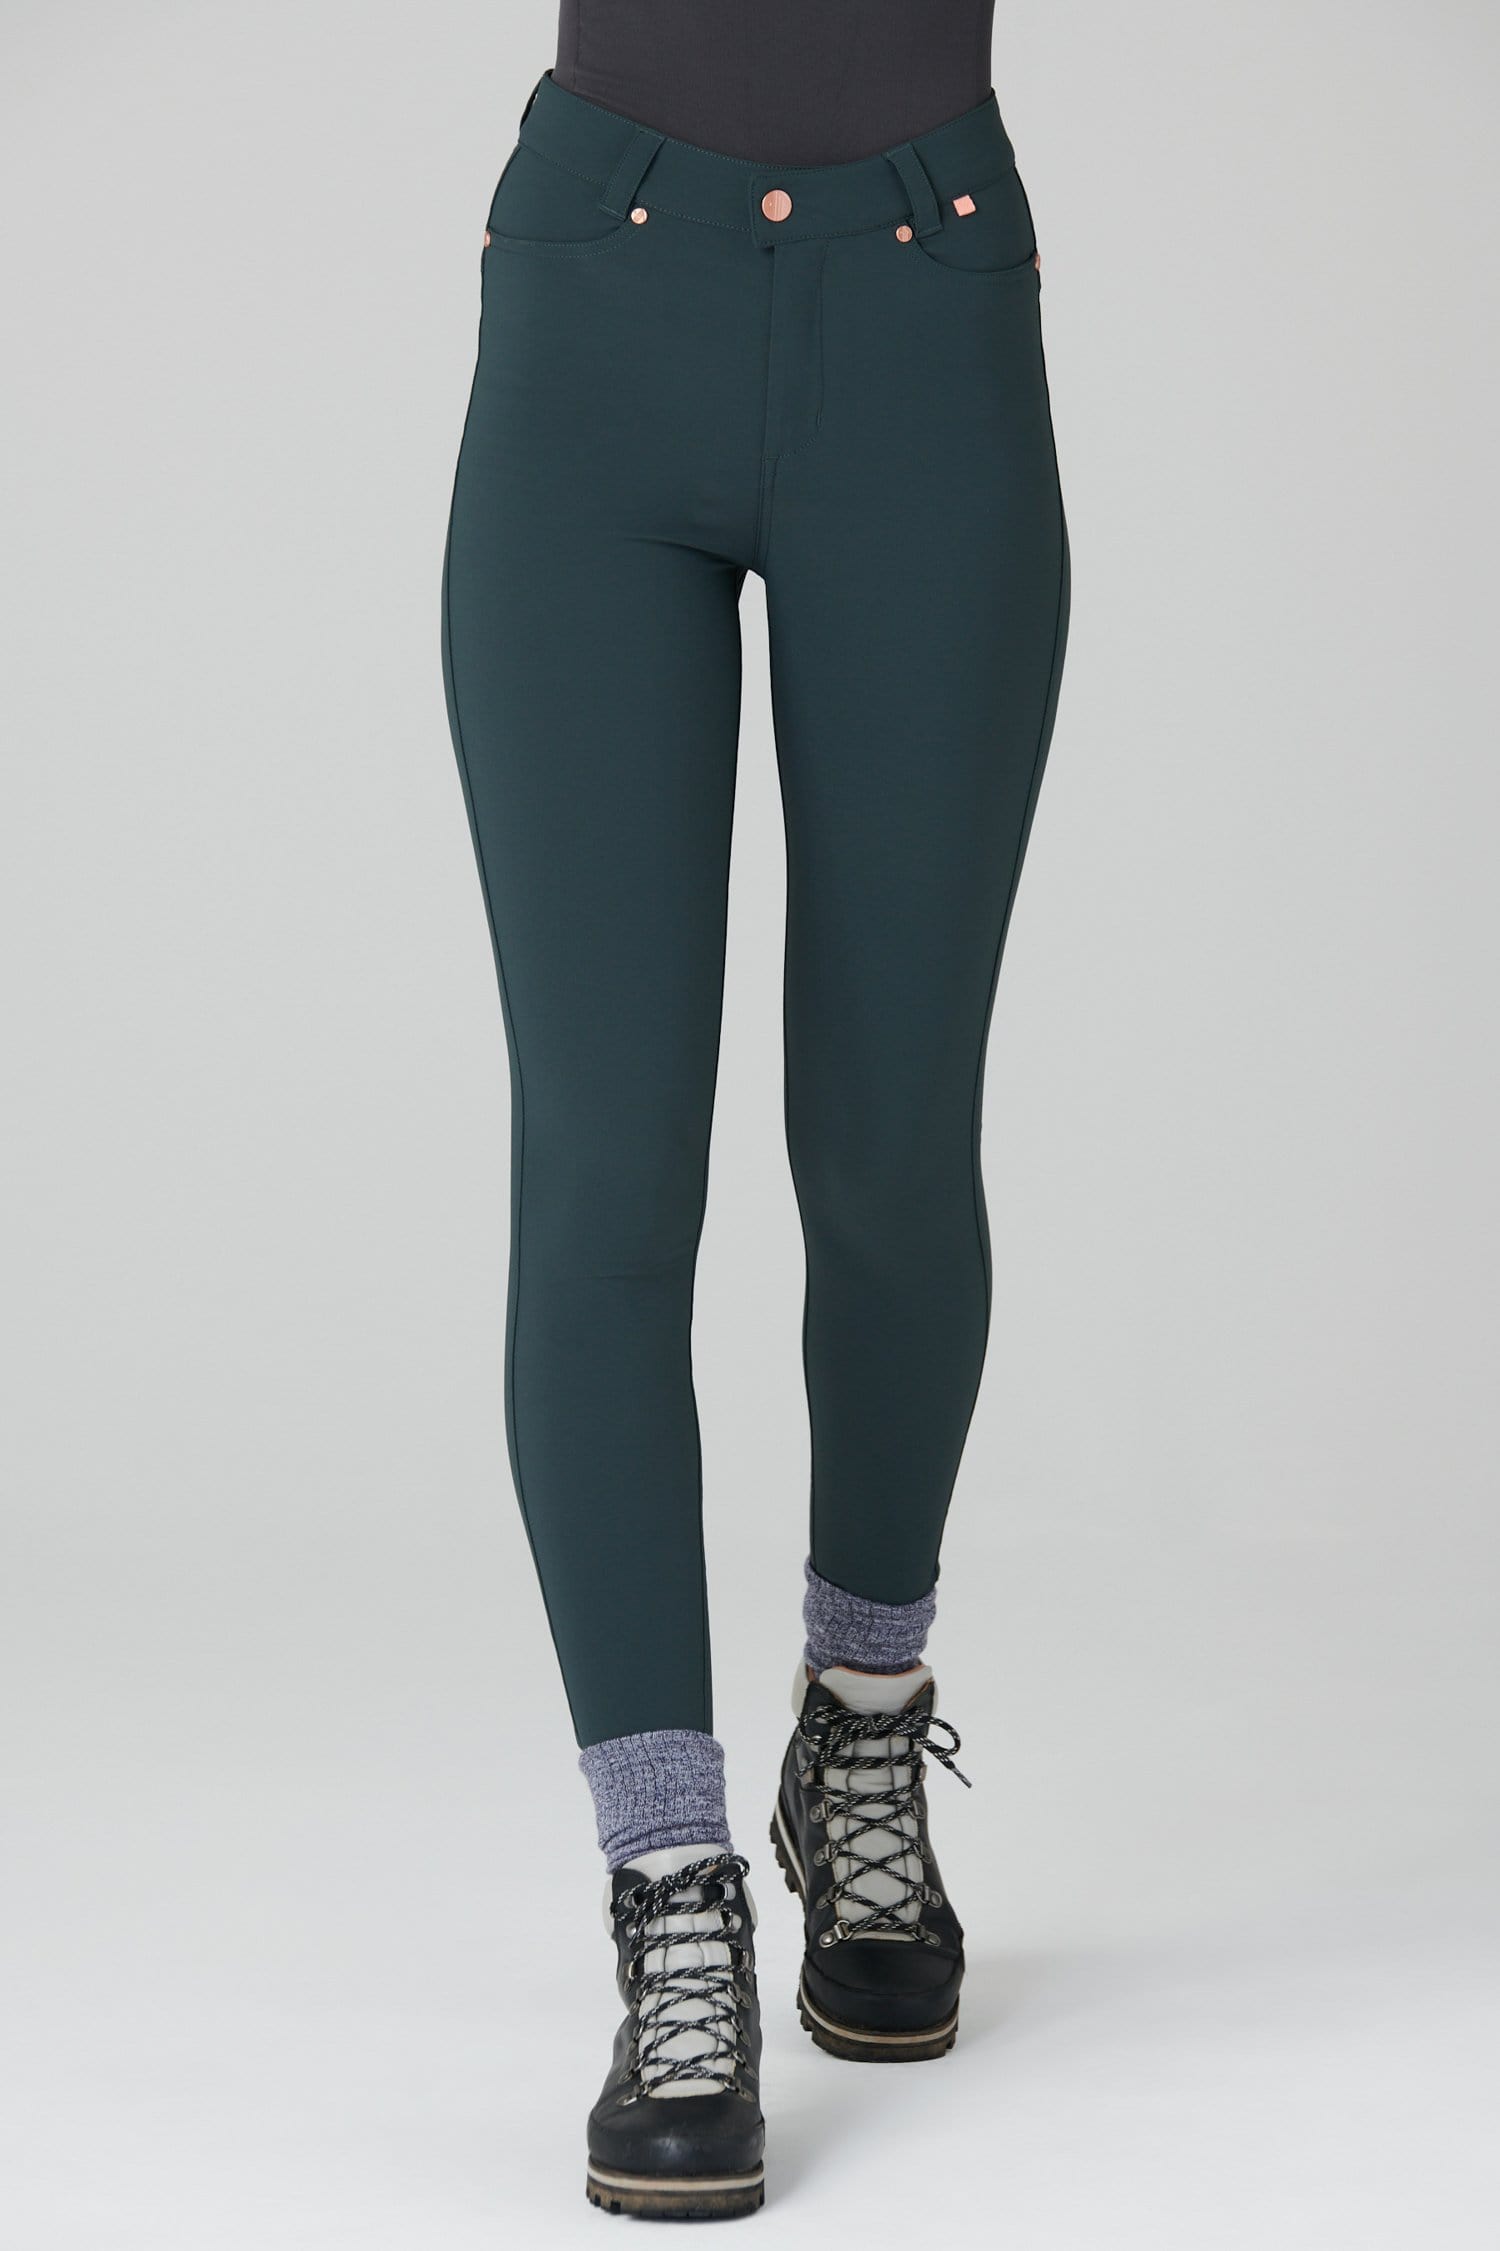 Max Stretch Skinny Outdoor Trousers - Forest Green - 30l / Uk12 - Womens - Acai Outdoorwear